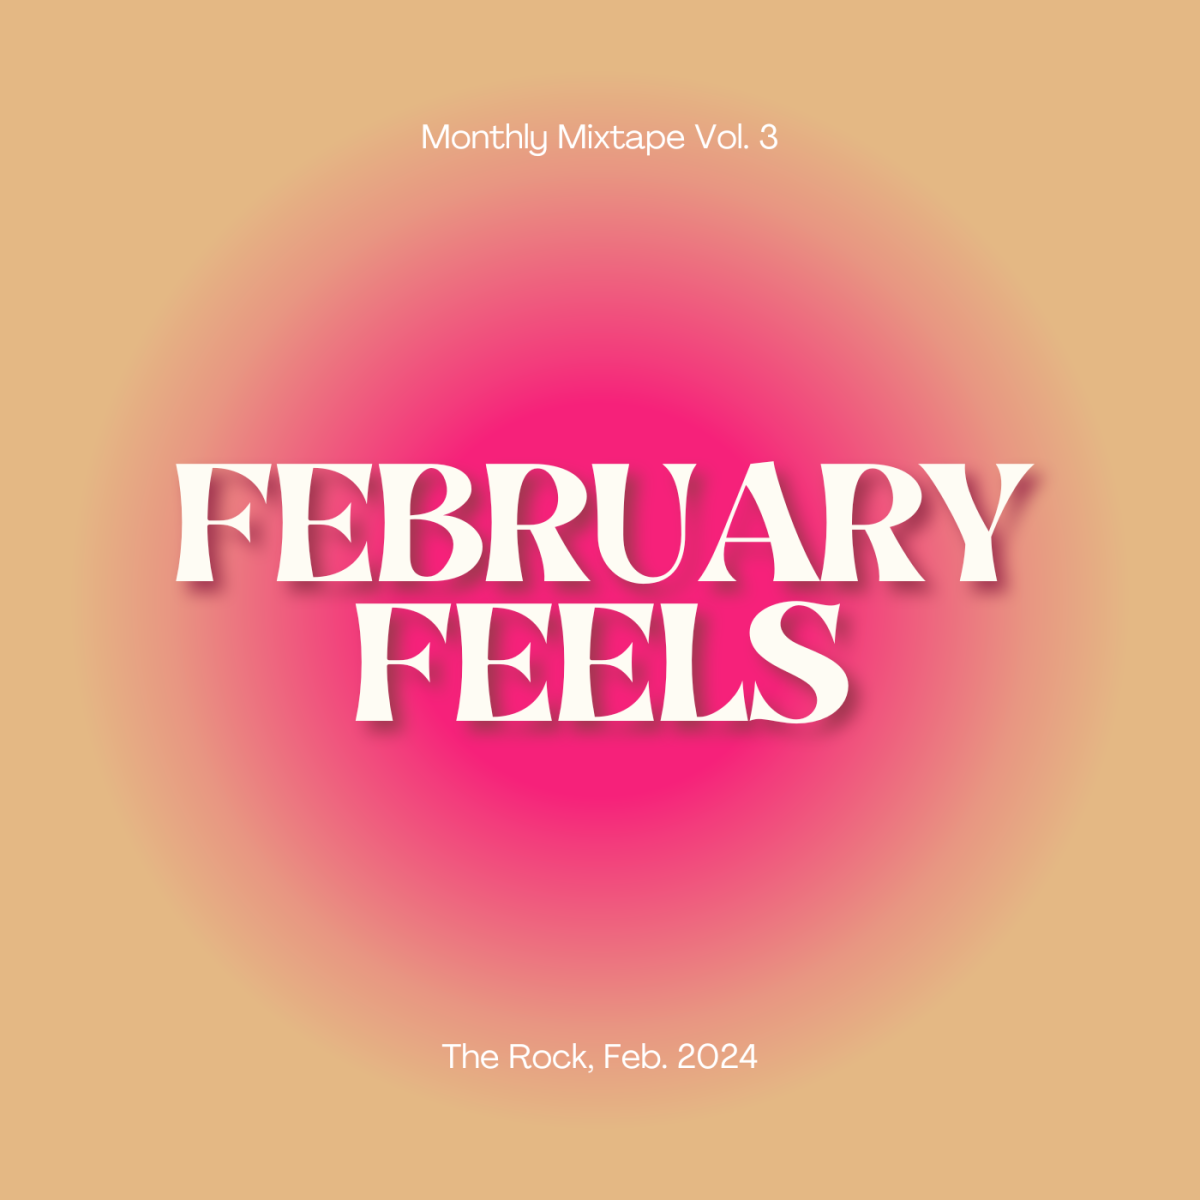 The graphic reads “February Feels” to introduce the assortment of songs picked this month.